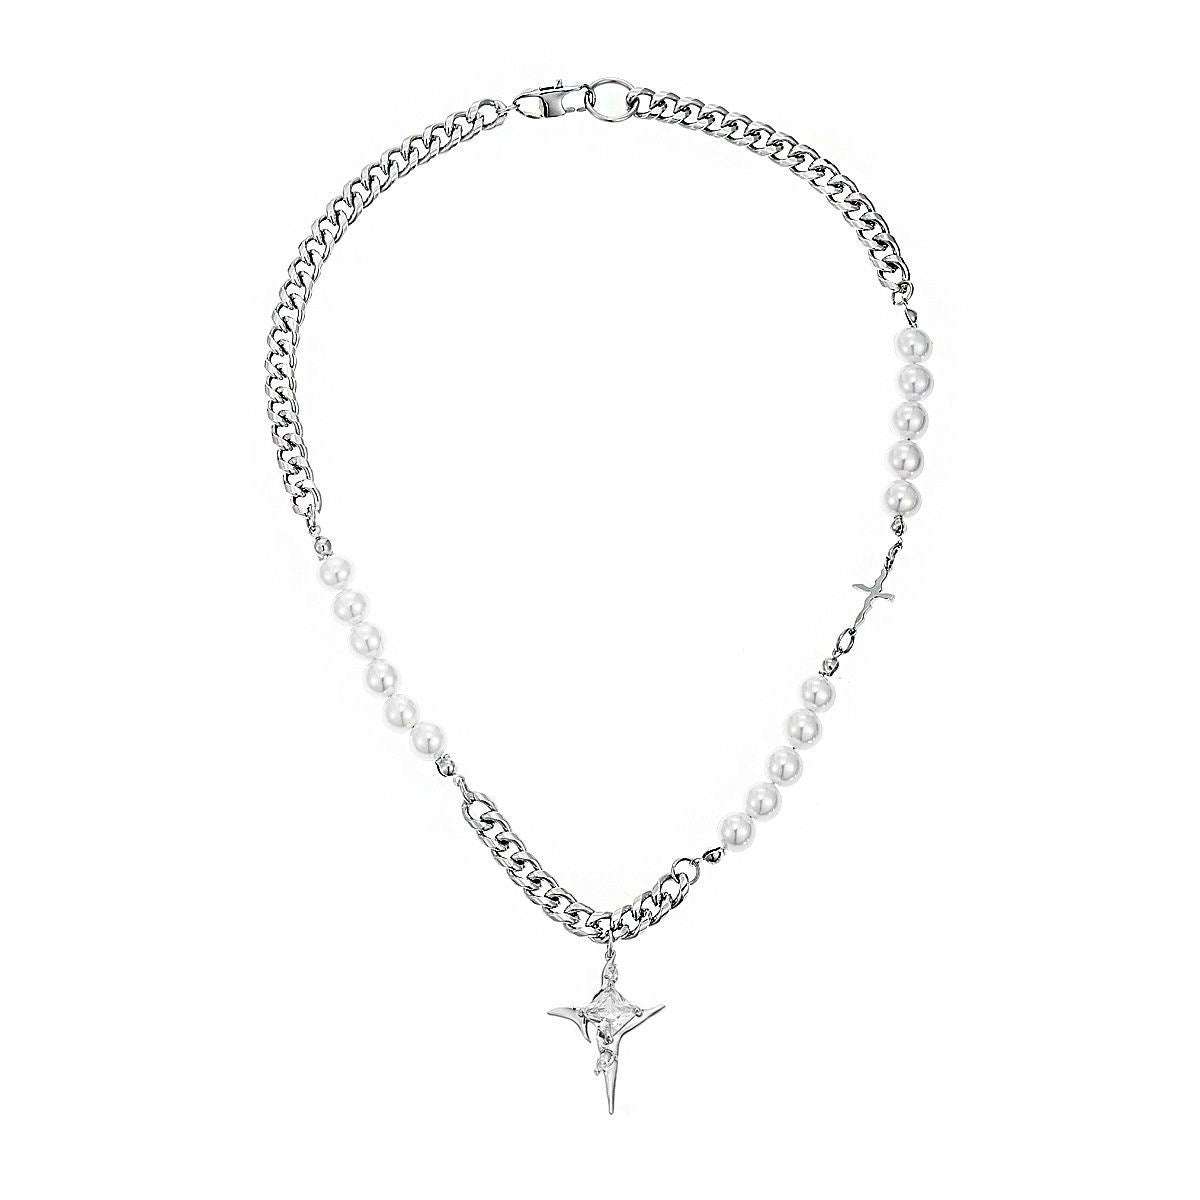 Men's fashion necklace, pearl cross necklace, titanium steel necklace - available at Sparq Mart